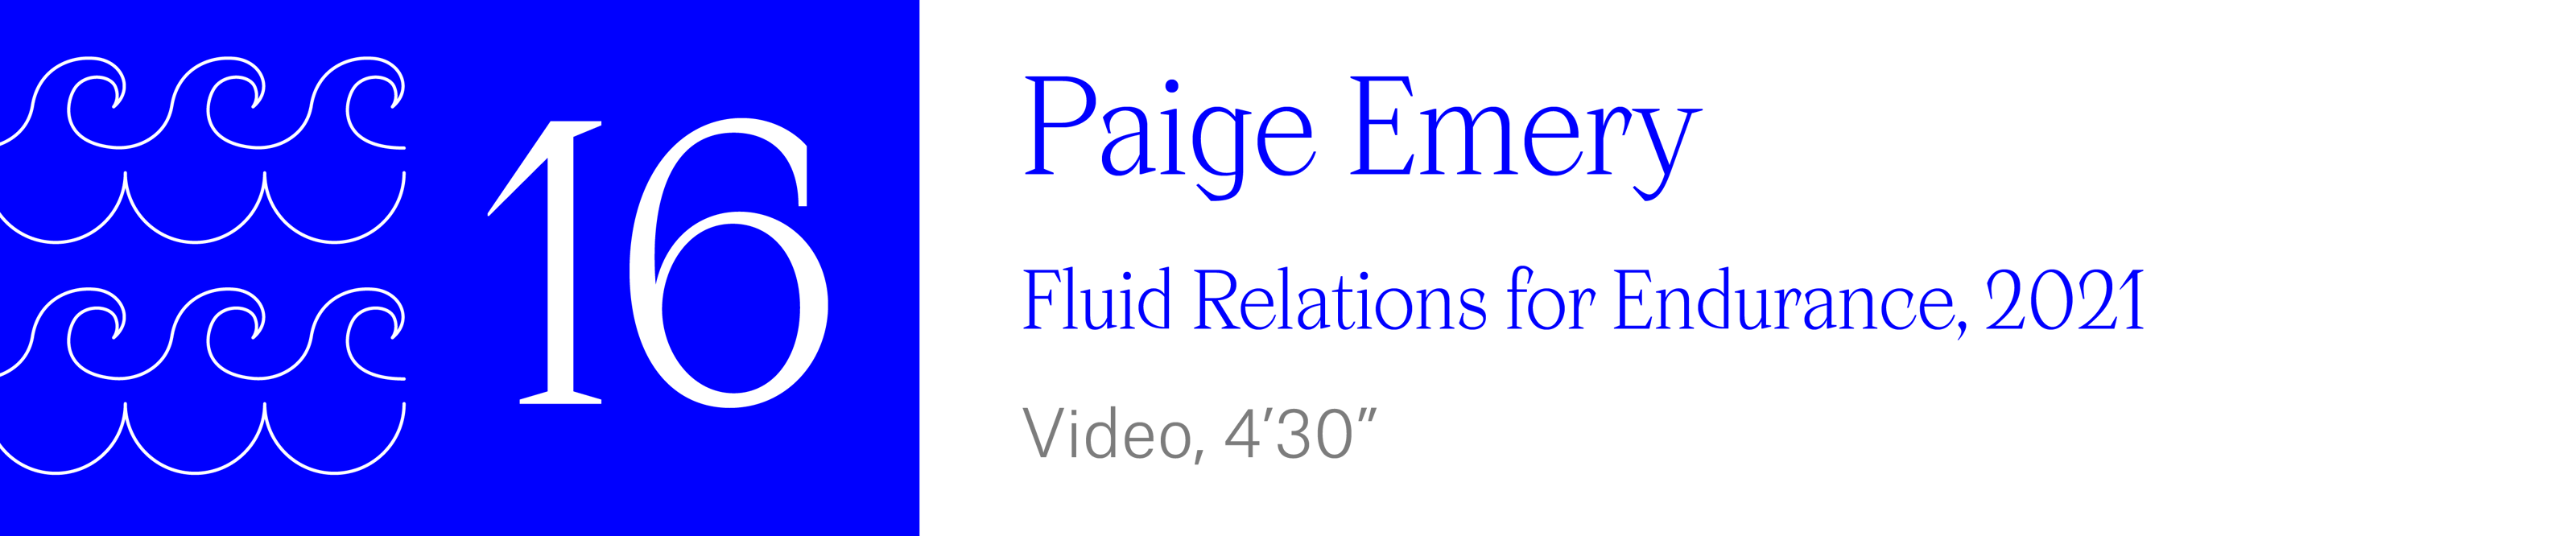 The Wave (16) - Paige Emery - Fluid Relations for Endurance, 2021. Video, 4 minutes, 30 seconds.